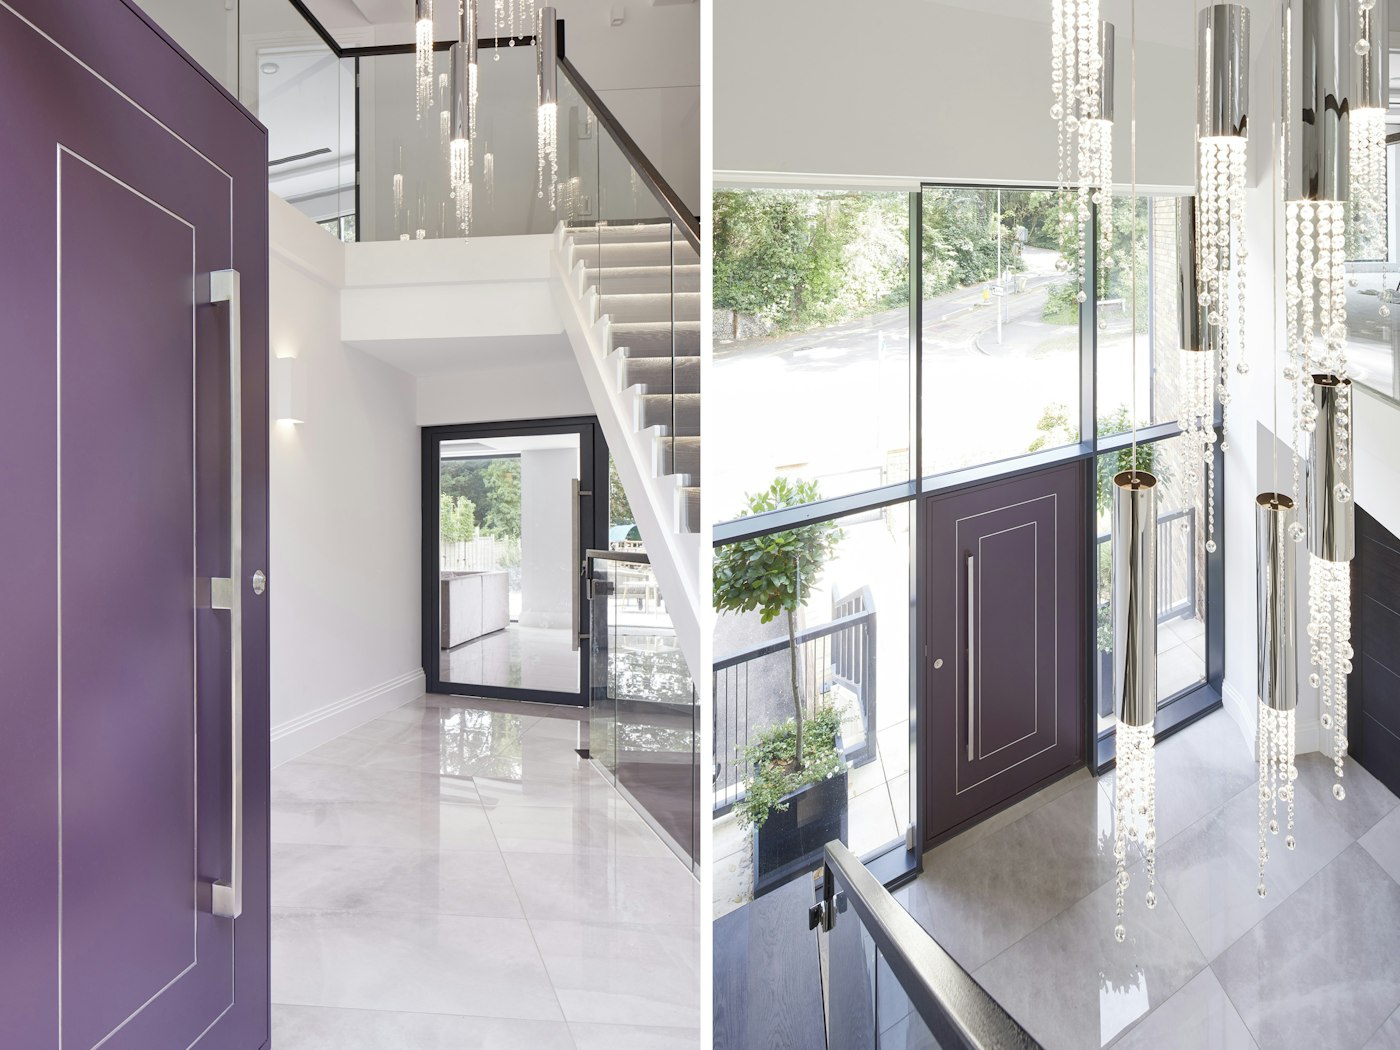 The stunning neutral tones of the interior and glass framing mean that this door stands out without being overpowering